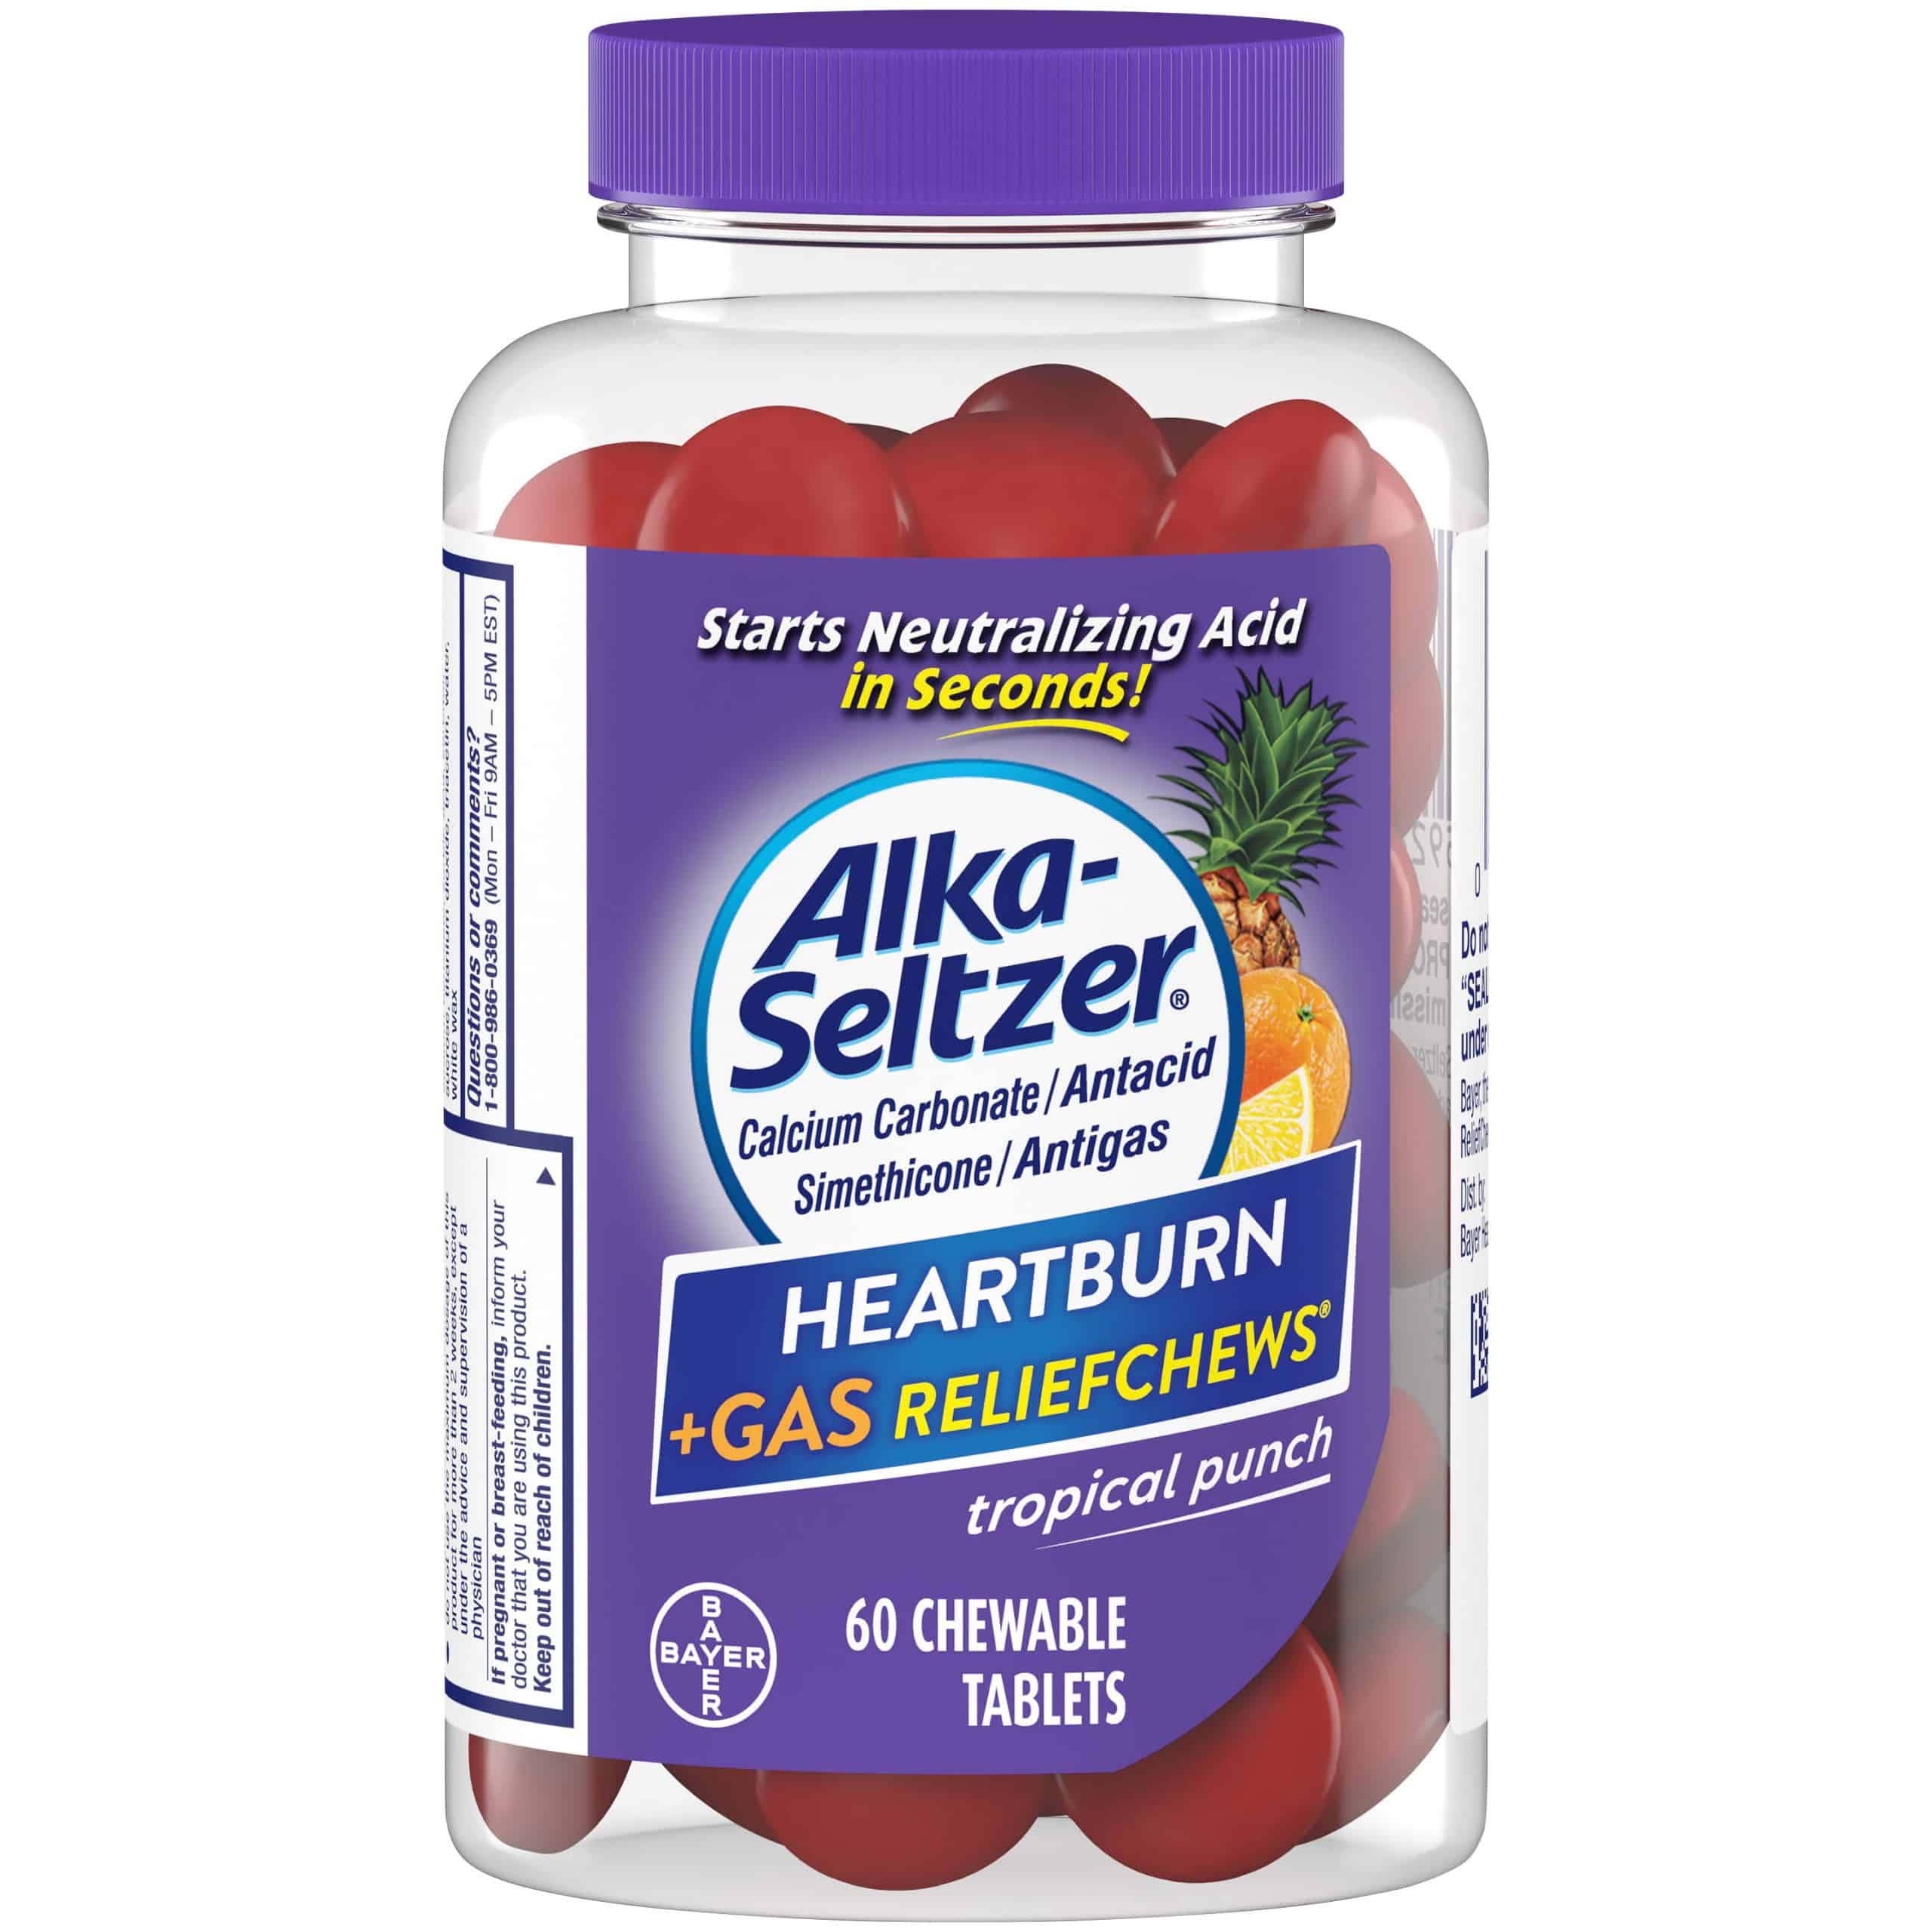 Alka Seltzer Heartburn Relief + Gas Relief Chews, Tropical Punch 60 Ct ...